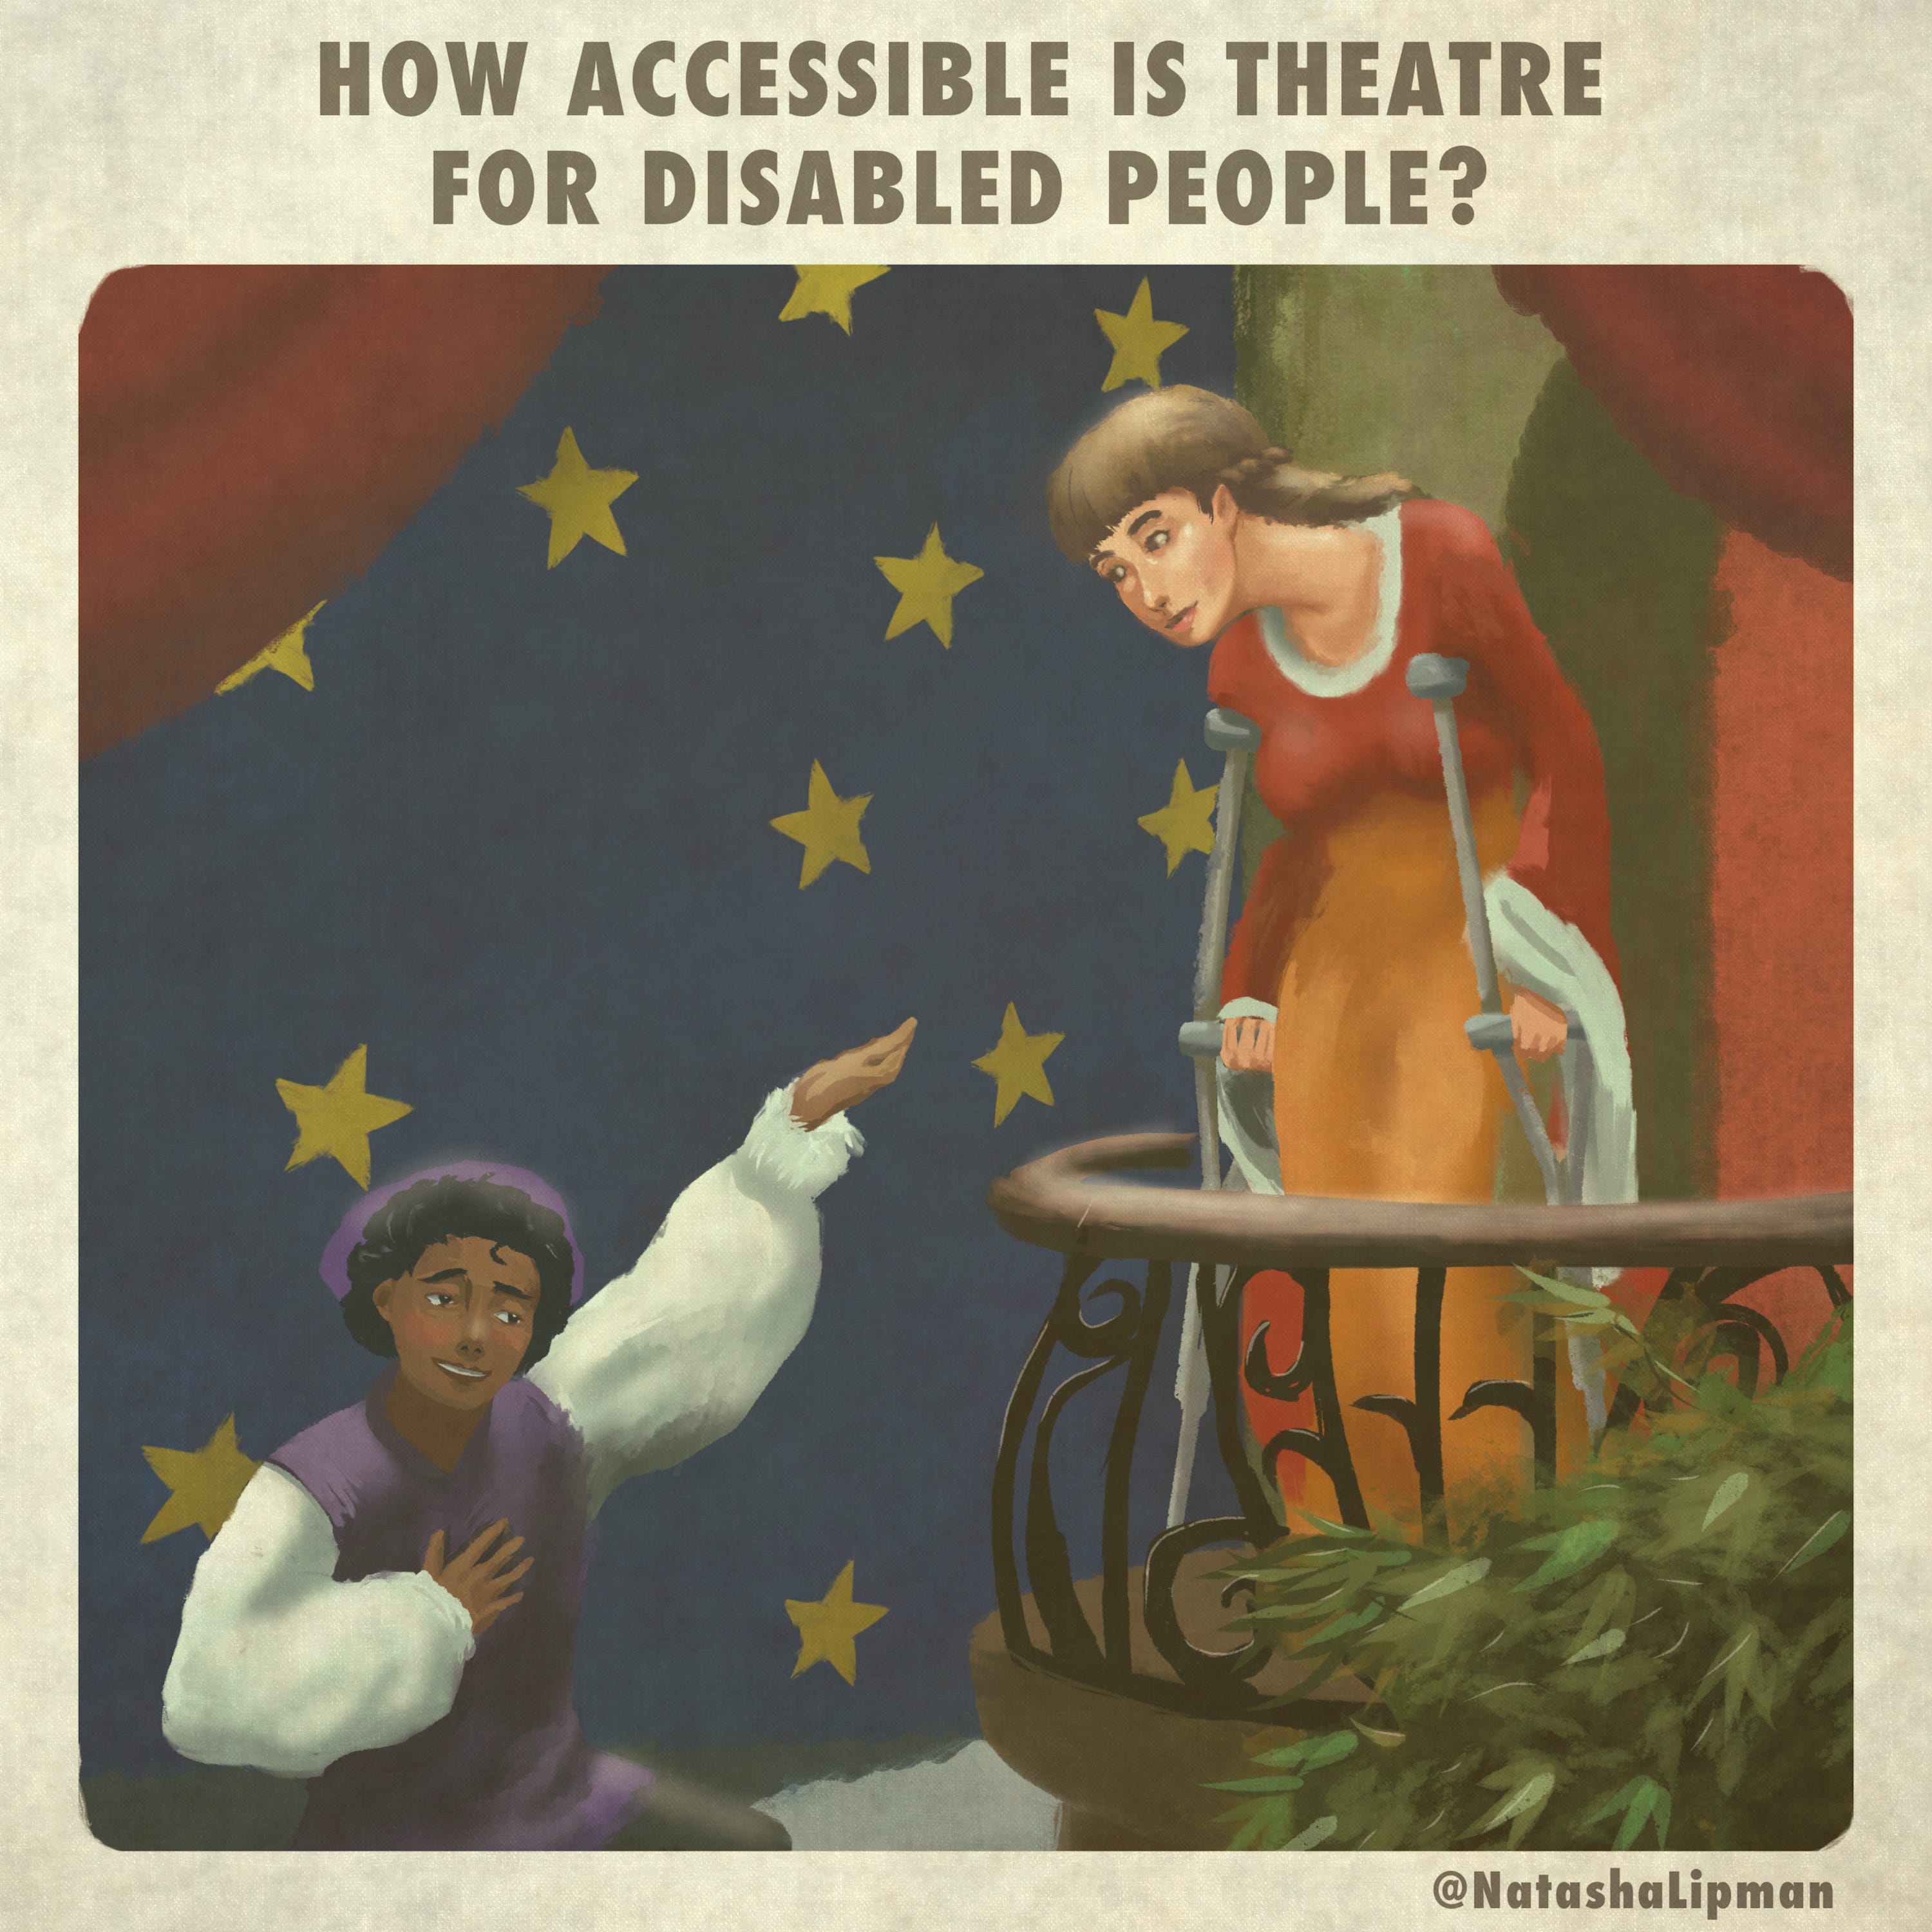 How accessible is theatre for disabled people?